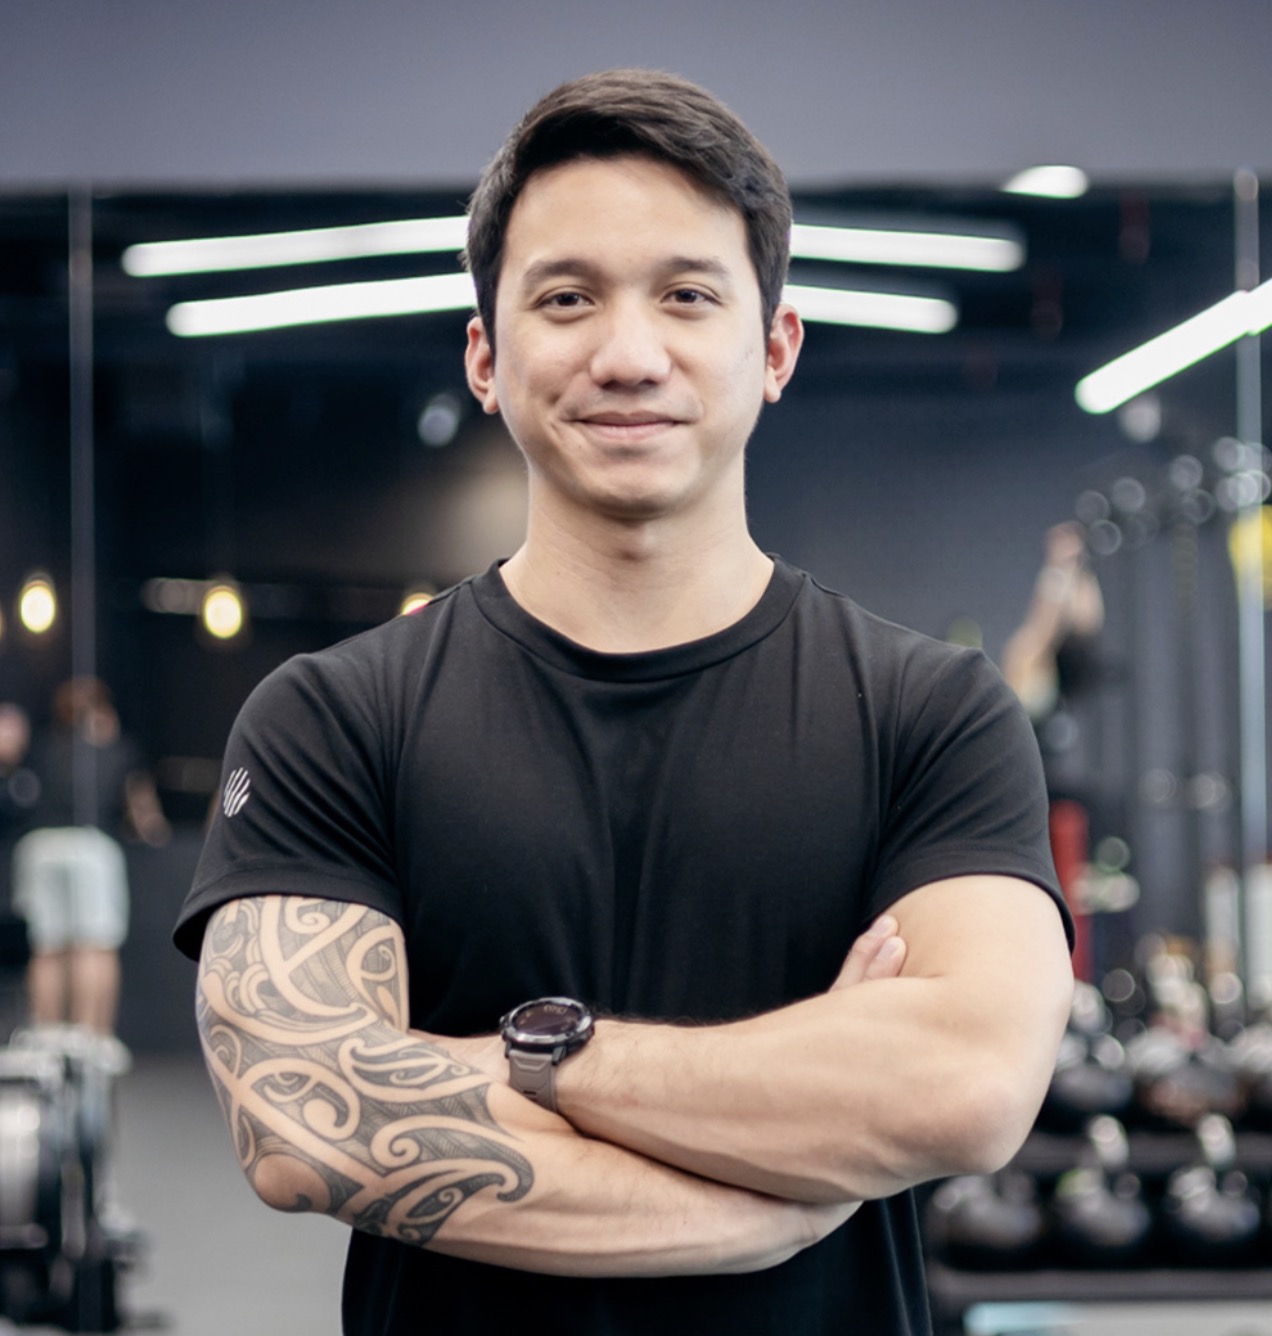 NASM Personal Training Certifications In Bangkok: Frequently Asked Questions